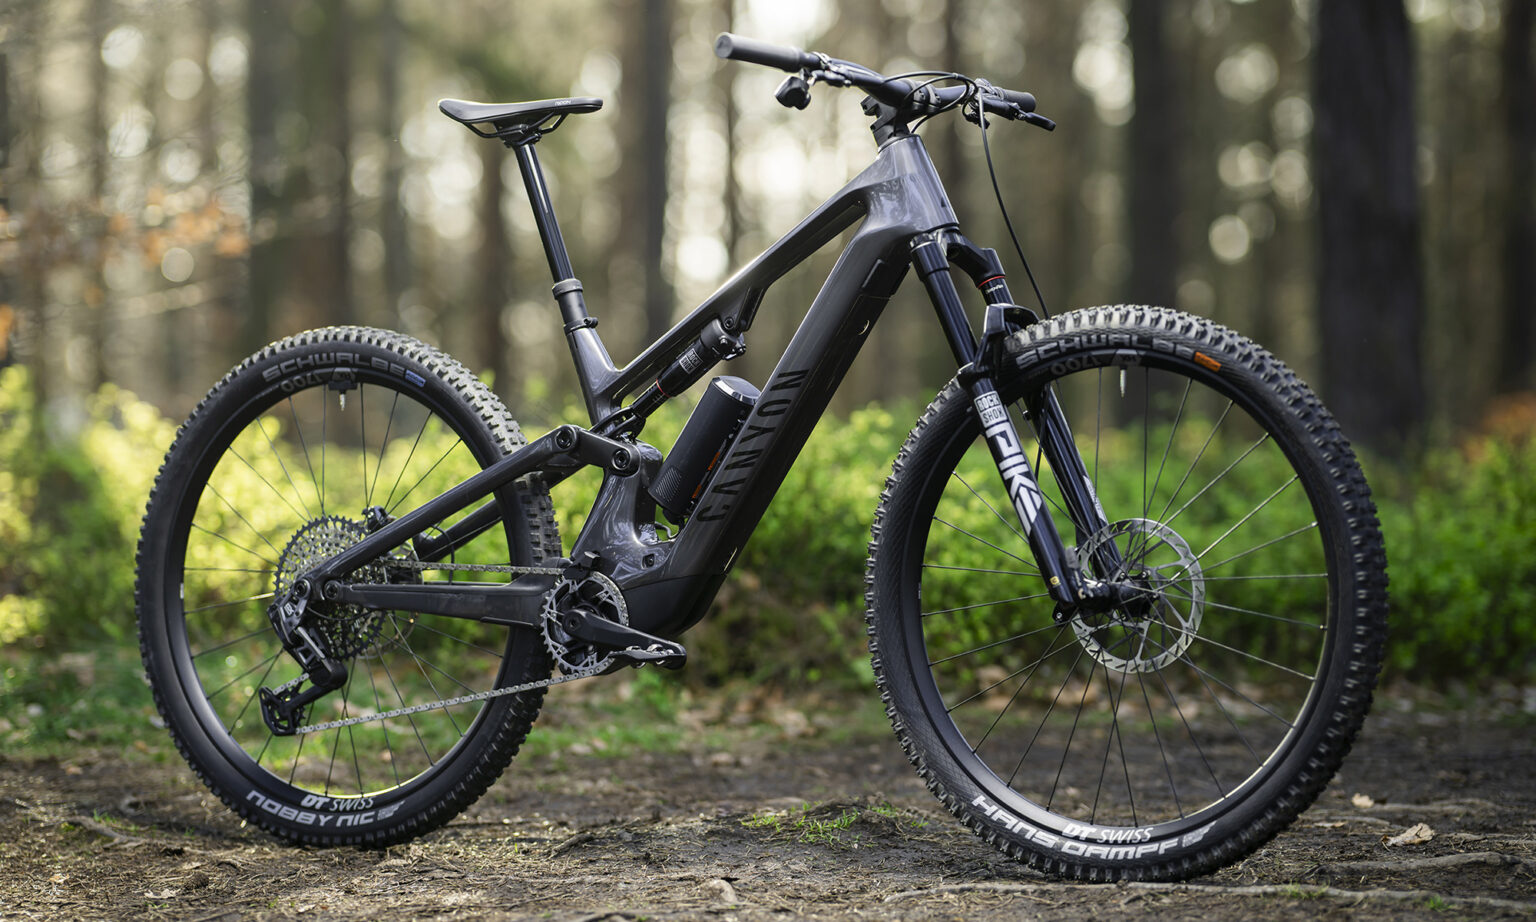 Canyon Neuron:ONfly lightweight 140mm carbon trail ebike with Bosch SX motor, angled